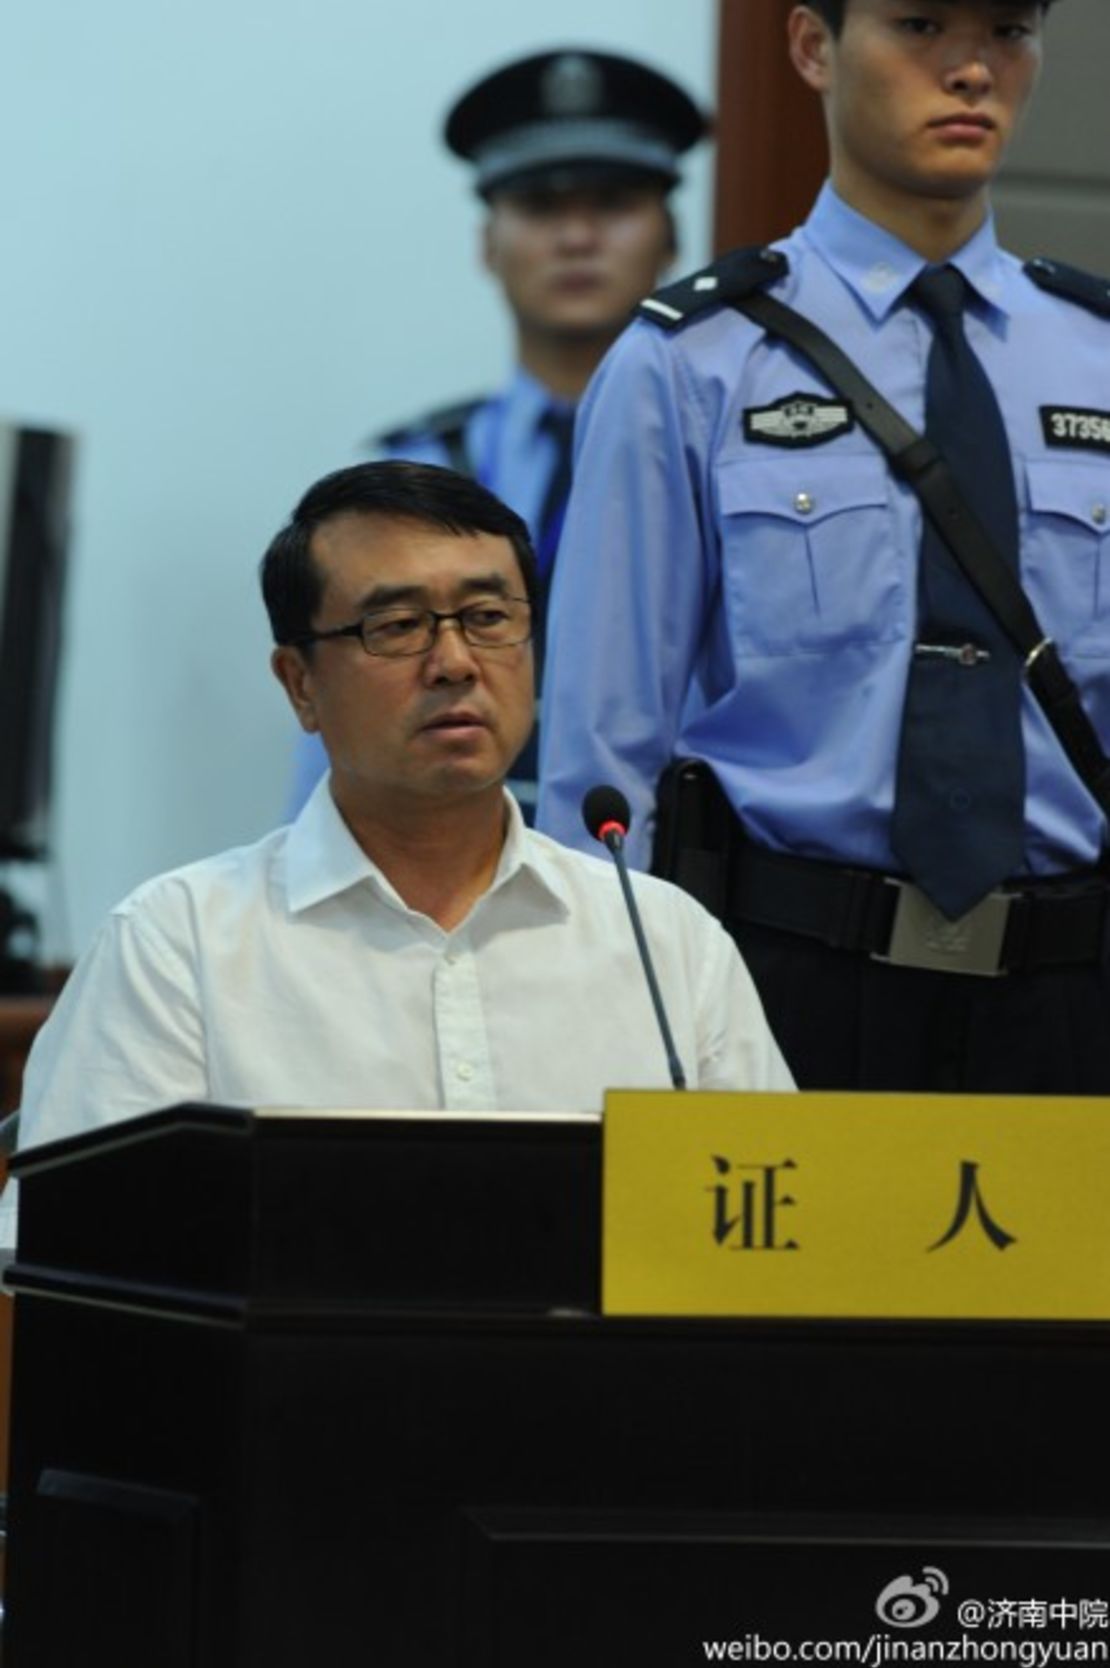 Wang Lijun appears in court to give evidence against his former boss Bo Xilai. 